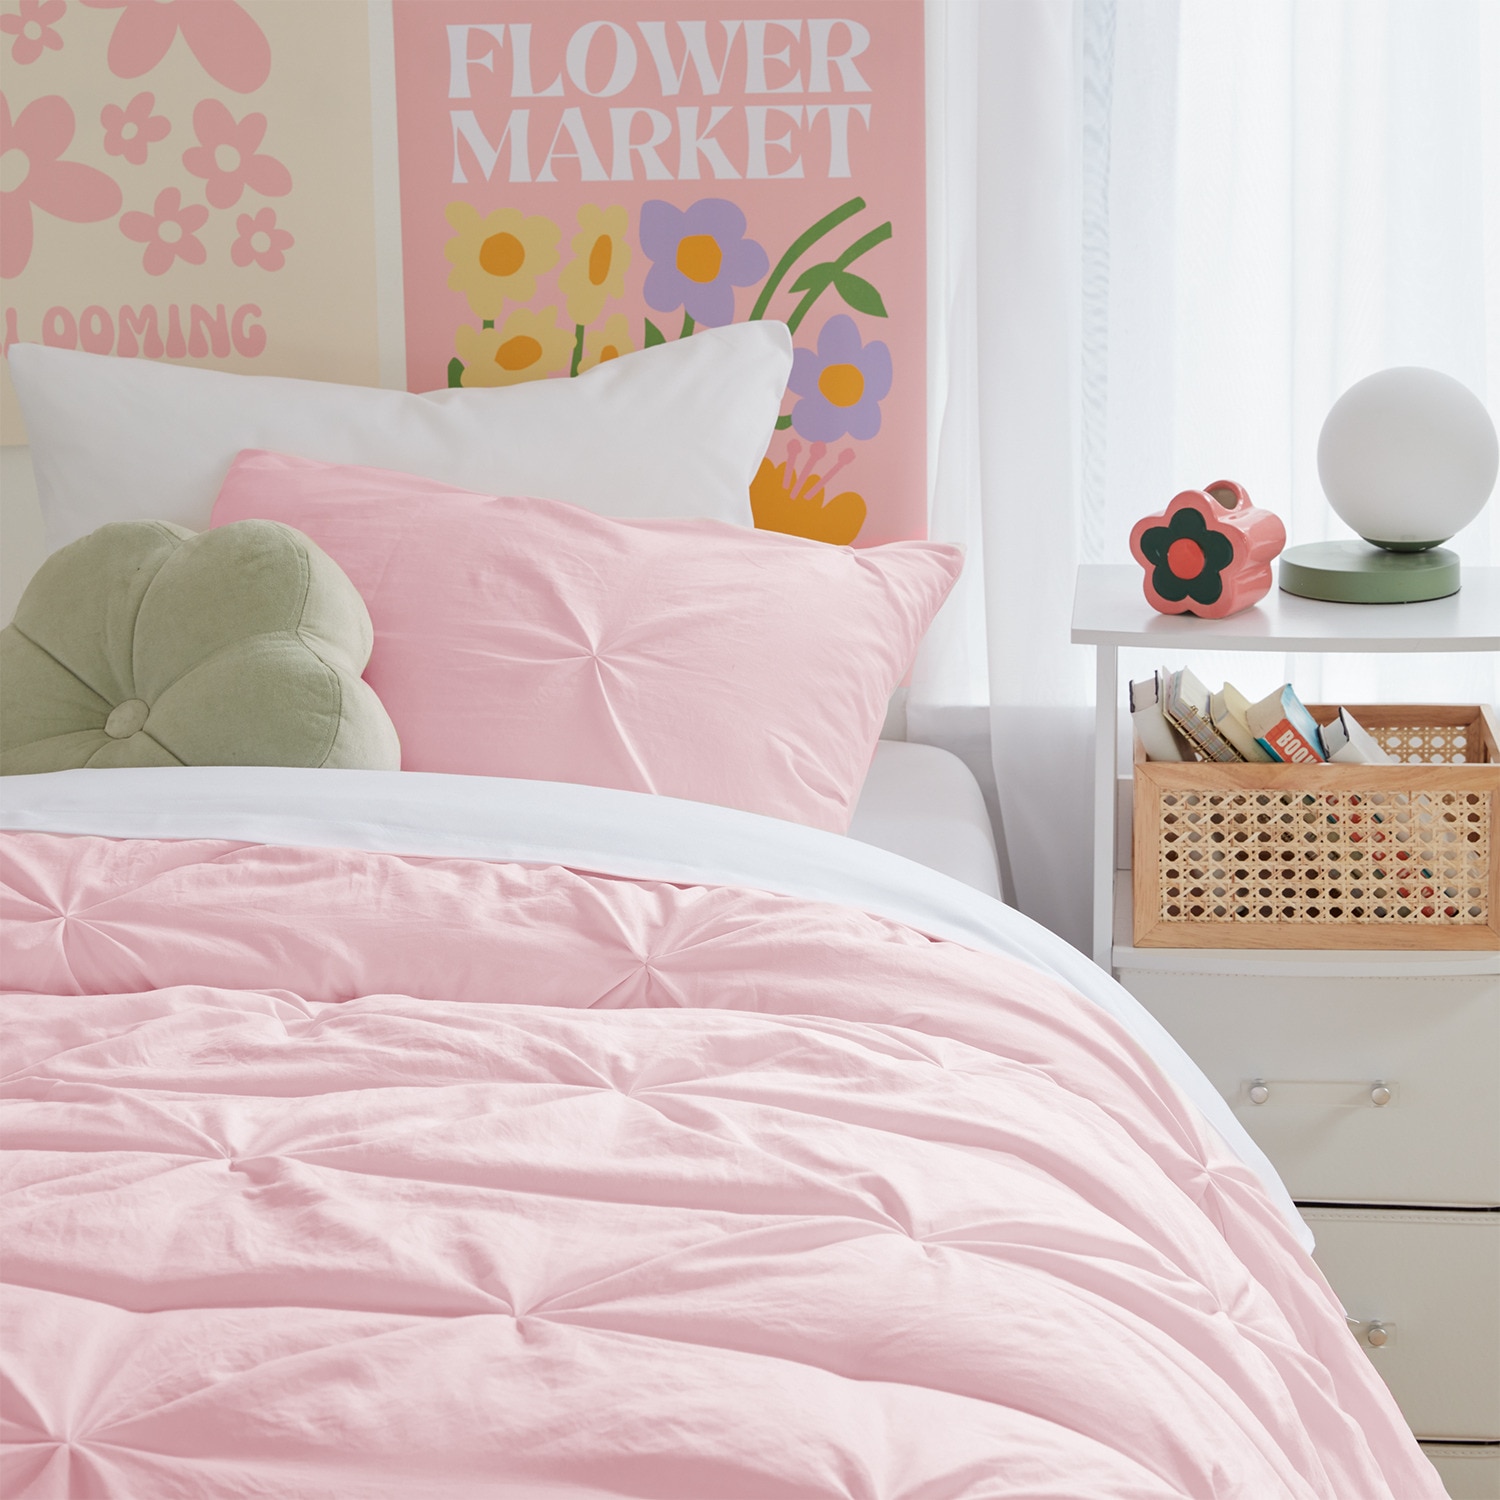 Dormify Poppy Pintuck Comforter and Sham Set - Twin/Twin XL